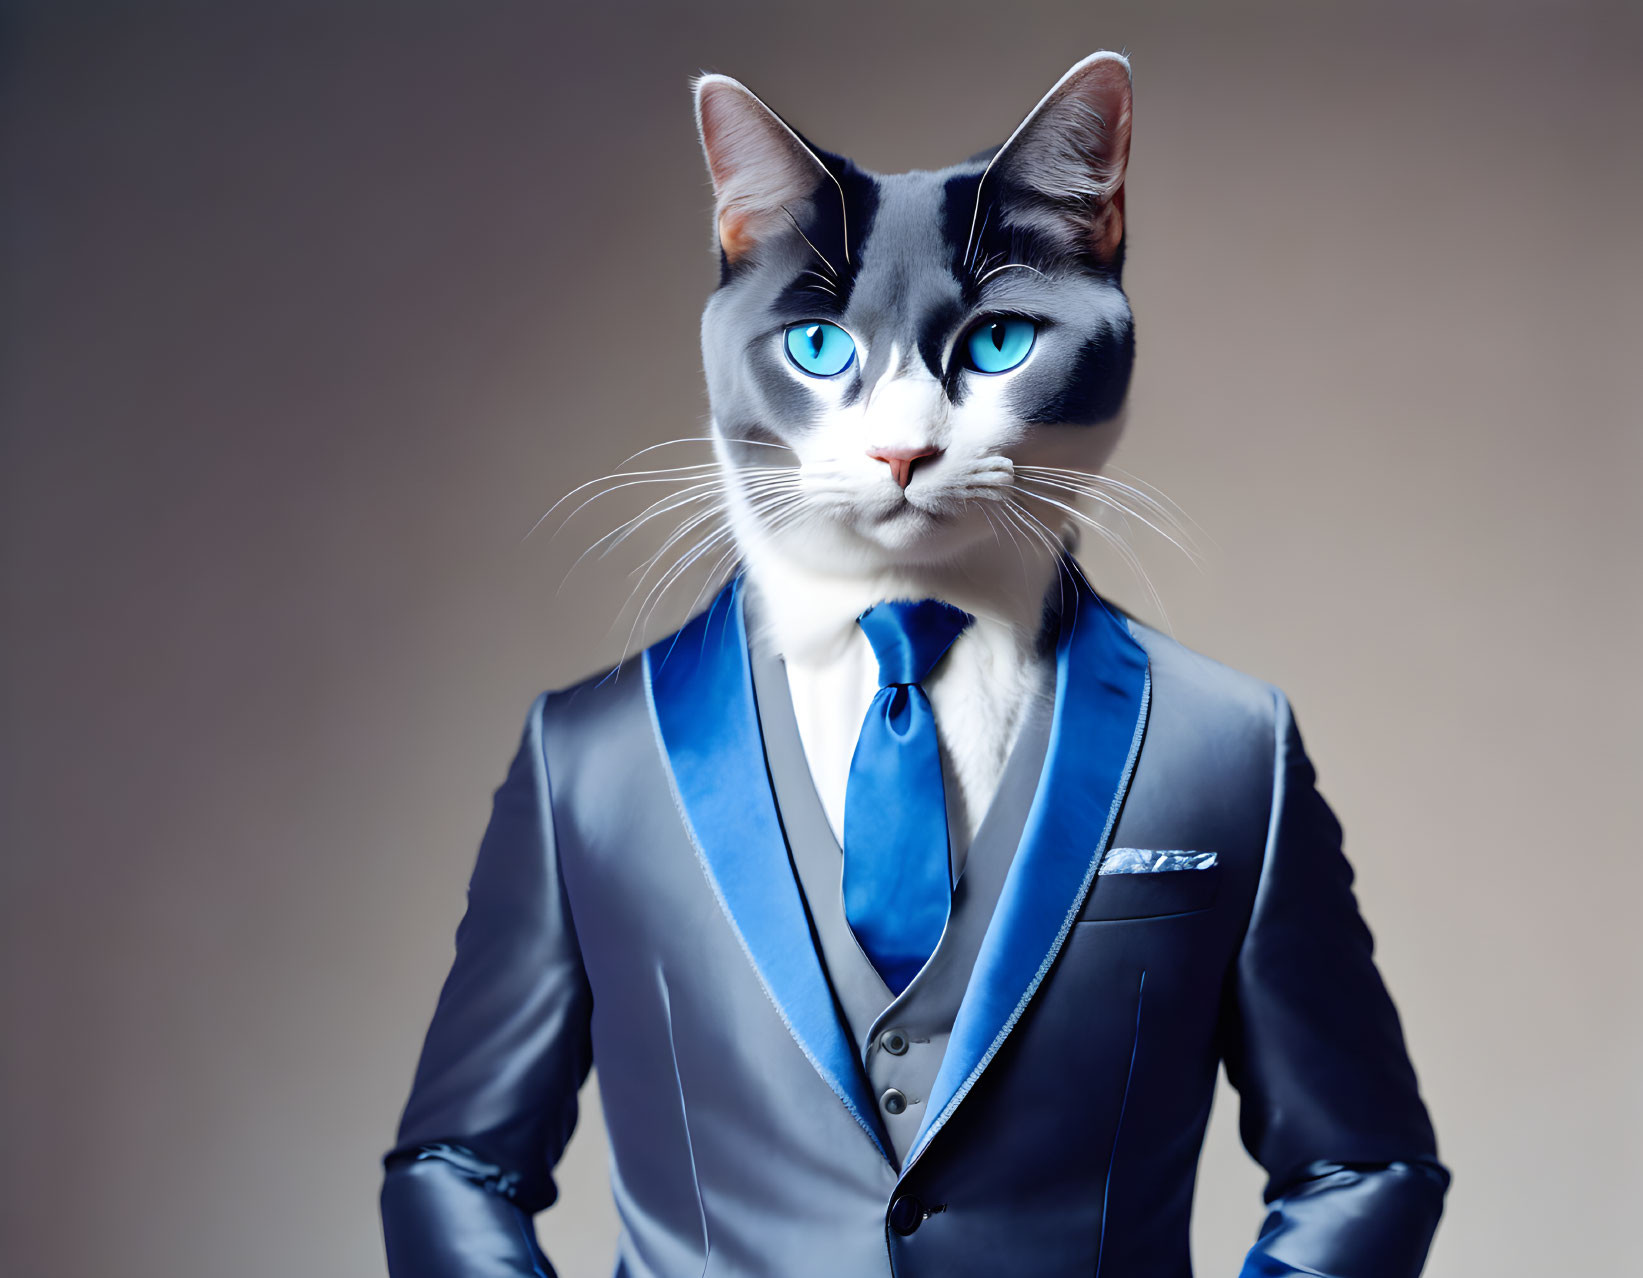 Cat head on human body in blue suit against neutral backdrop